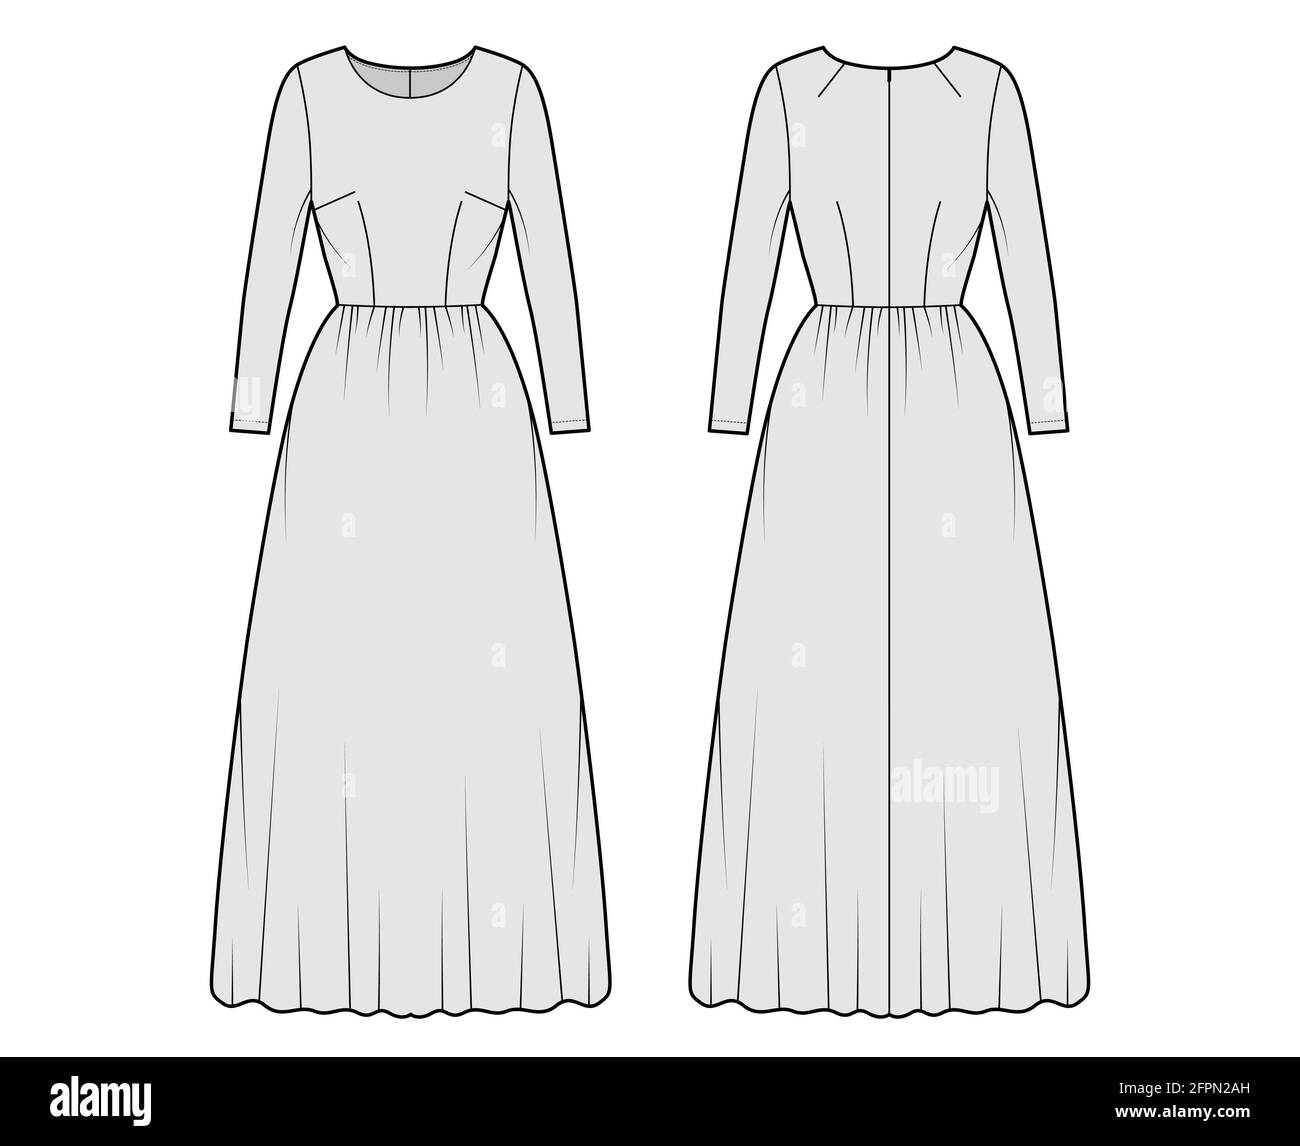 Dress long technical fashion illustration with long sleeve, fitted body ...